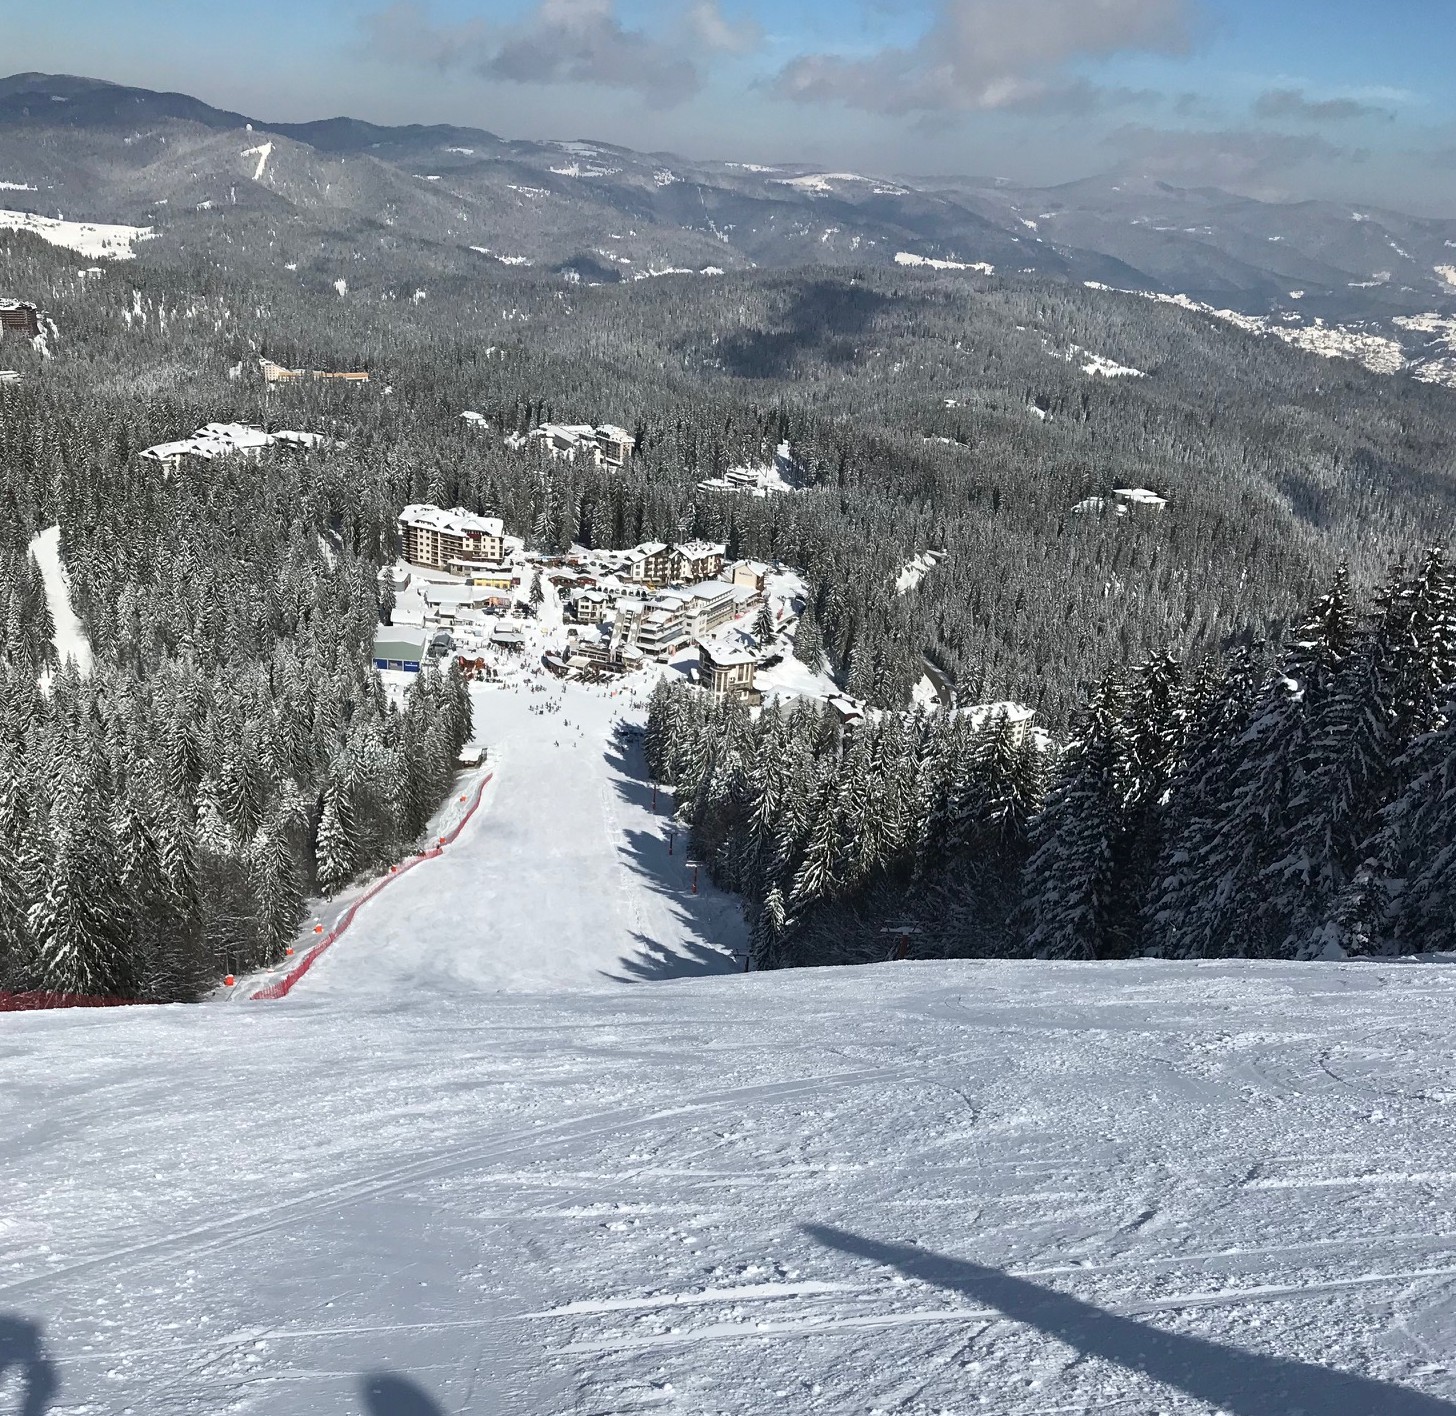 Looking down the demo slope in Pamporovo